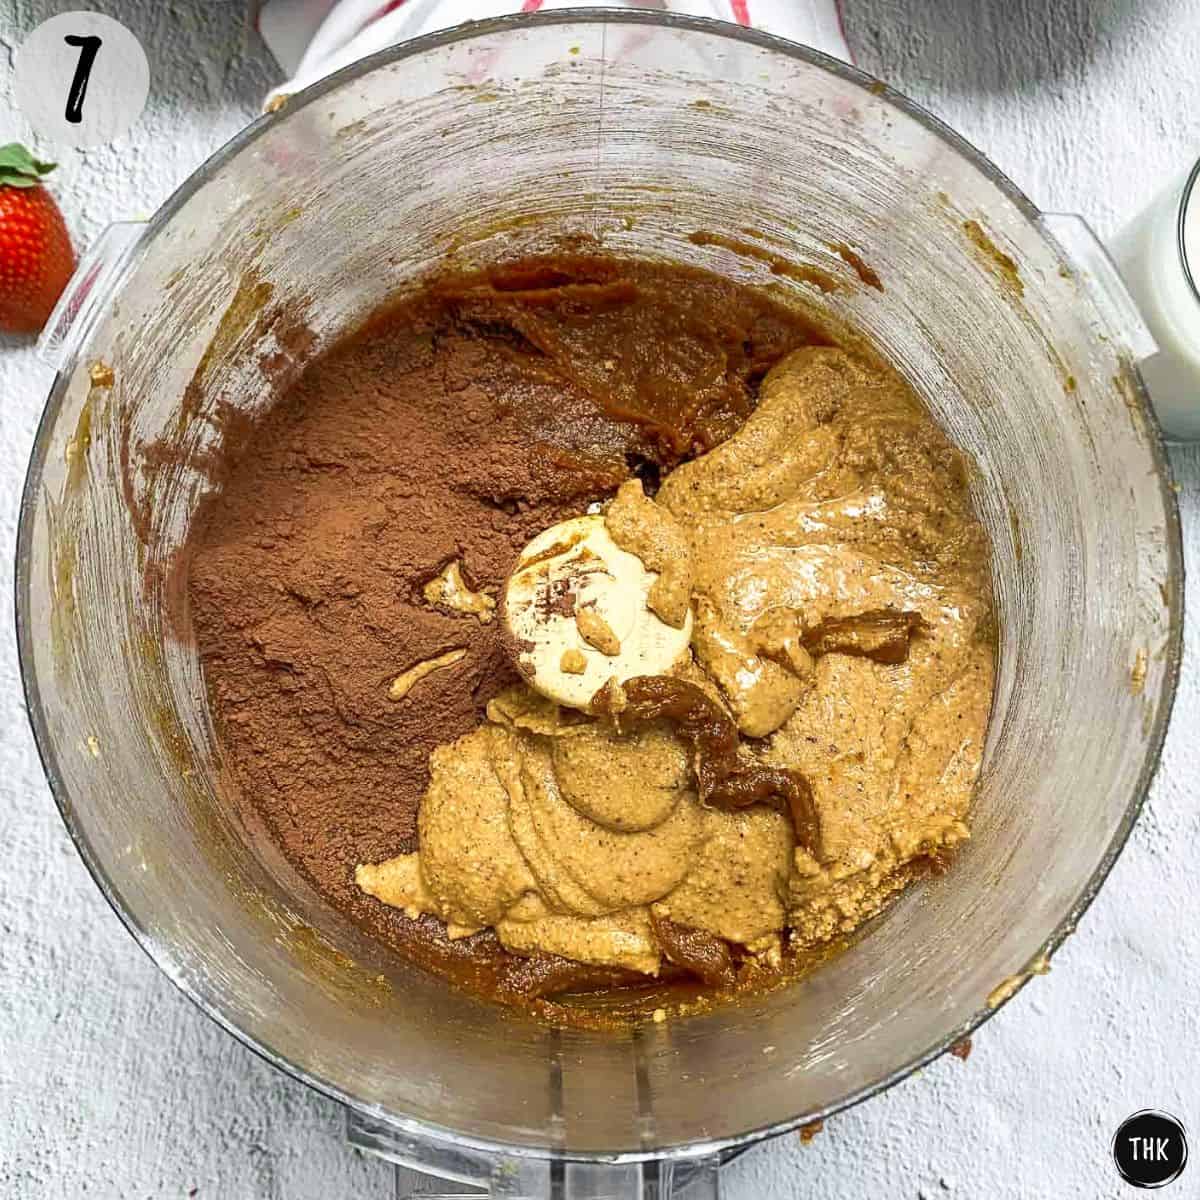 Date paste, hazelnut spread, and cocoa powder in bowl of food processor.